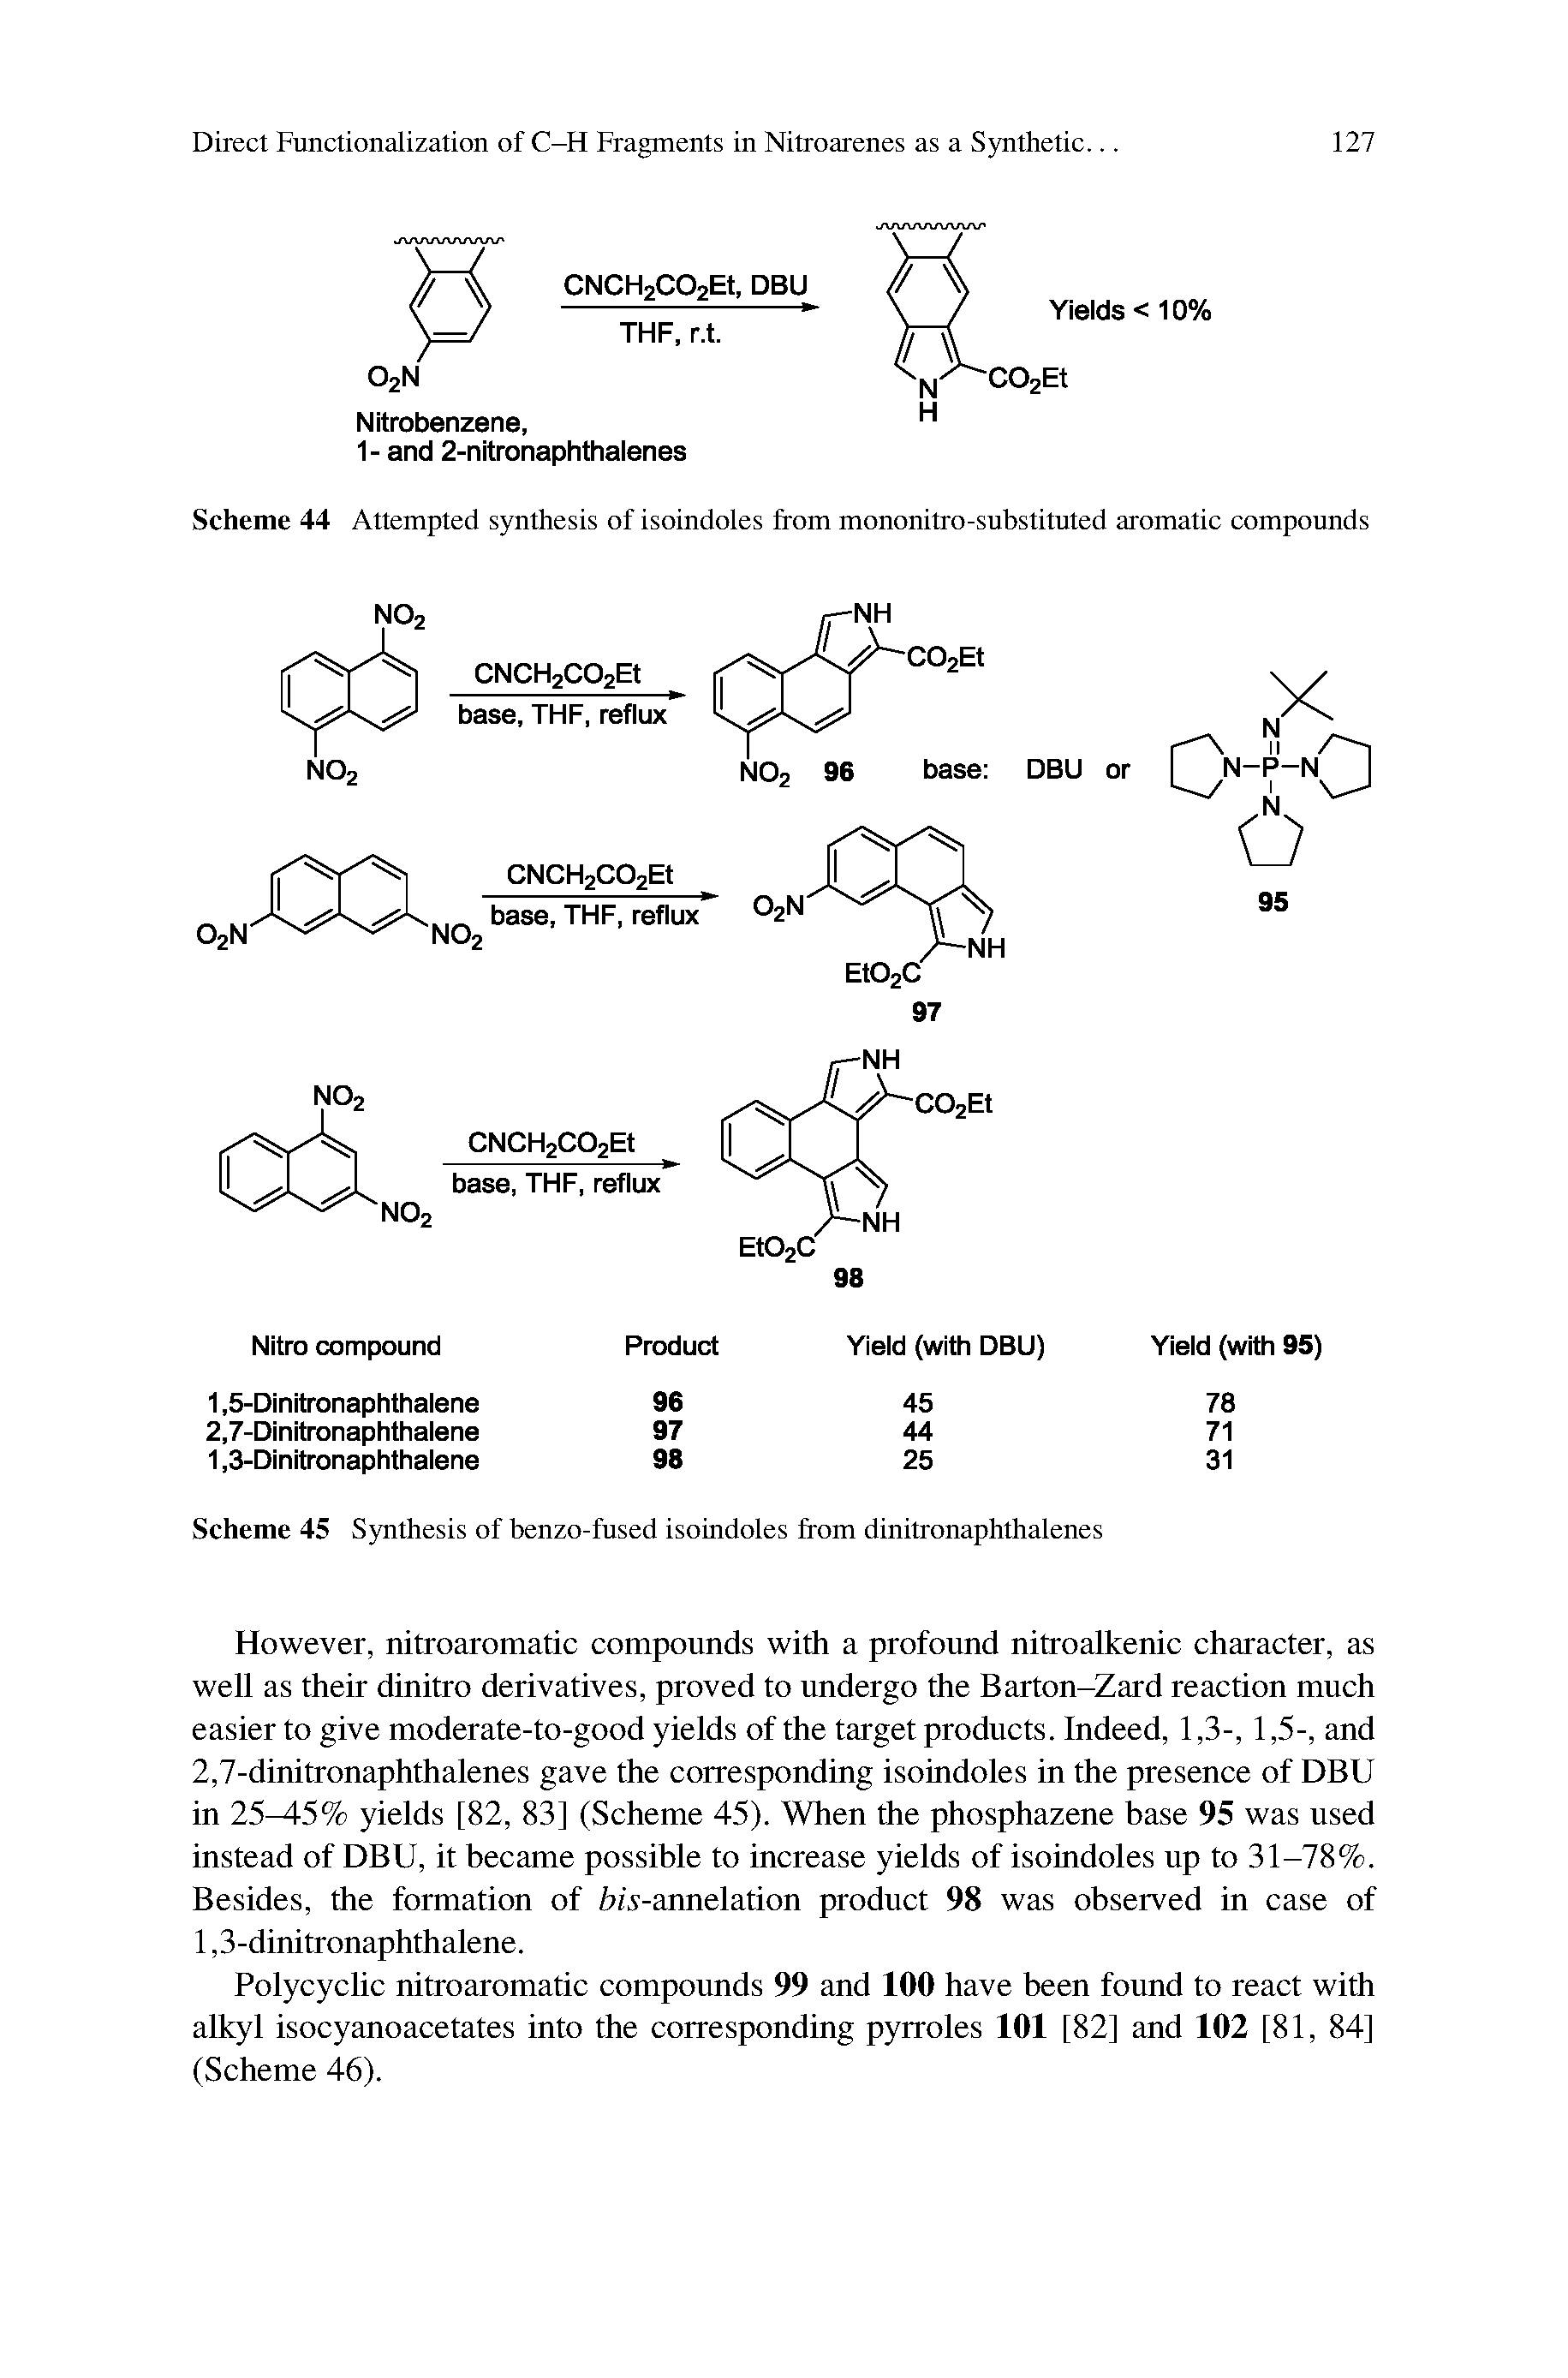 Scheme 45 Synthesis of benzo-fused isoindoles from dinitronaphthalenes...